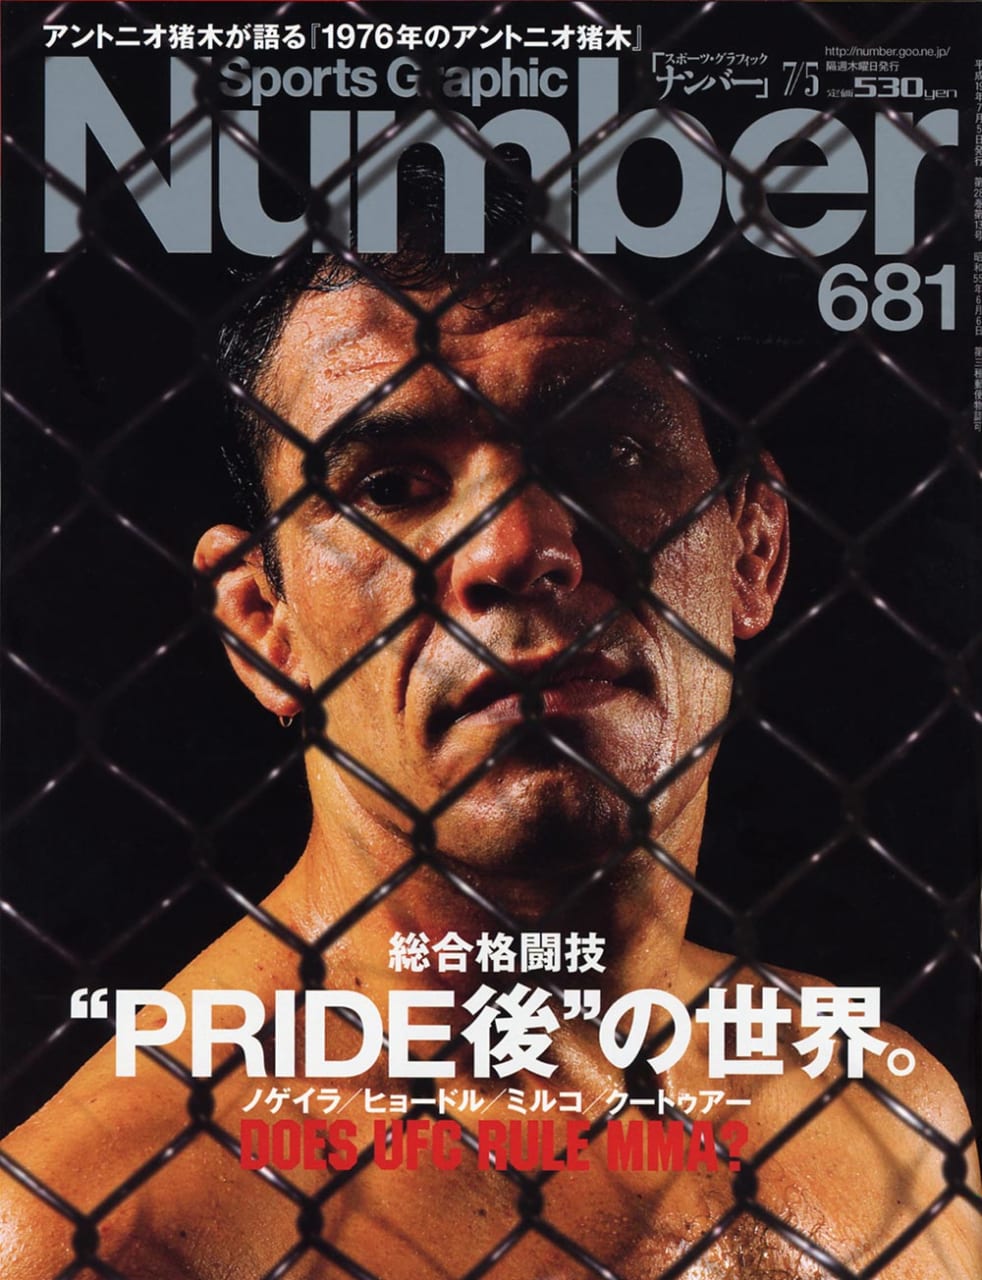 Sports Graphic Number 681号
2007年6月21日発売
表紙撮影：DYSK